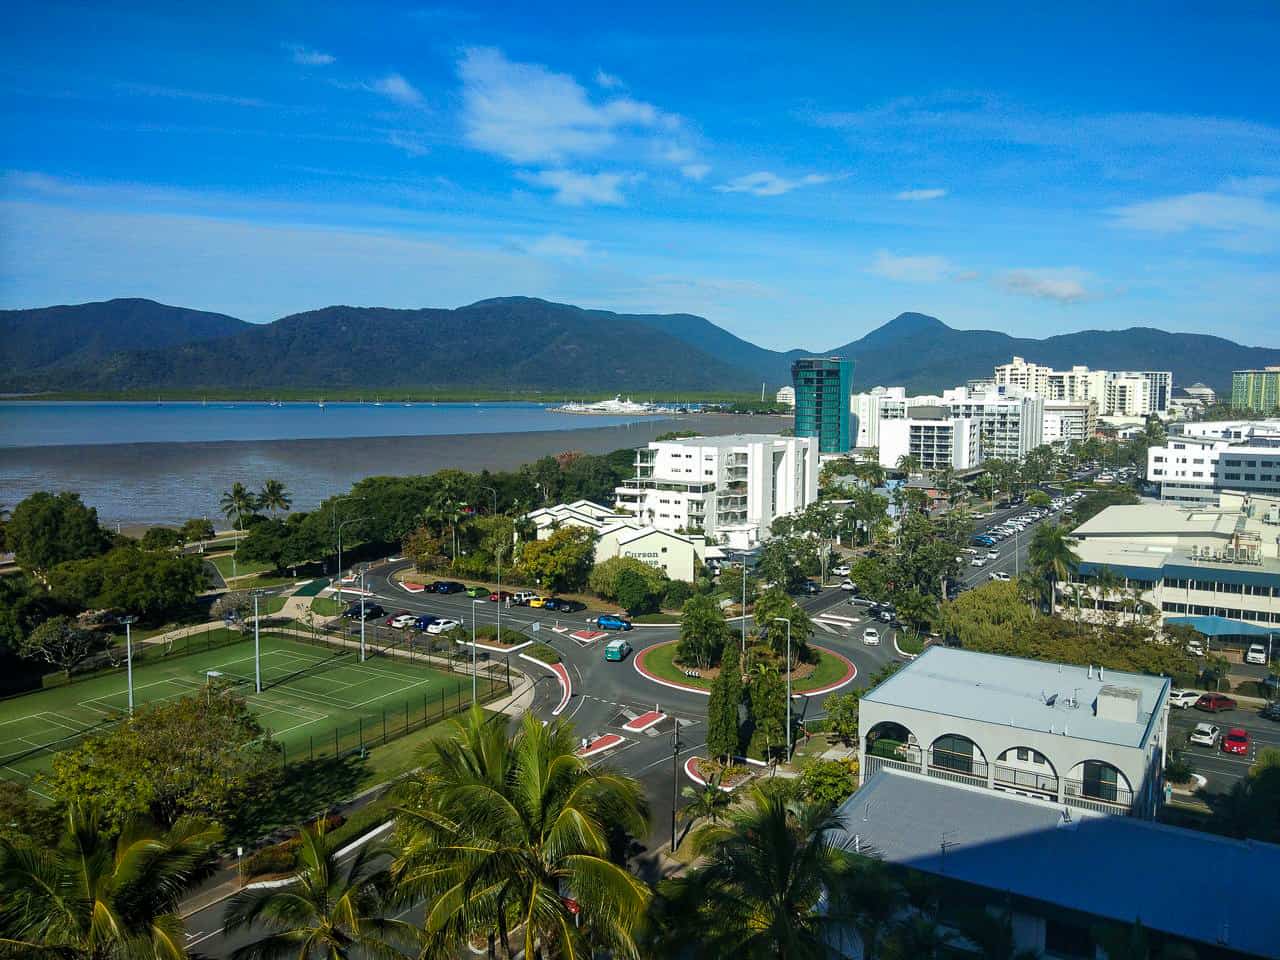 City views from Rydges Resort Cairns // Travel Mermaid